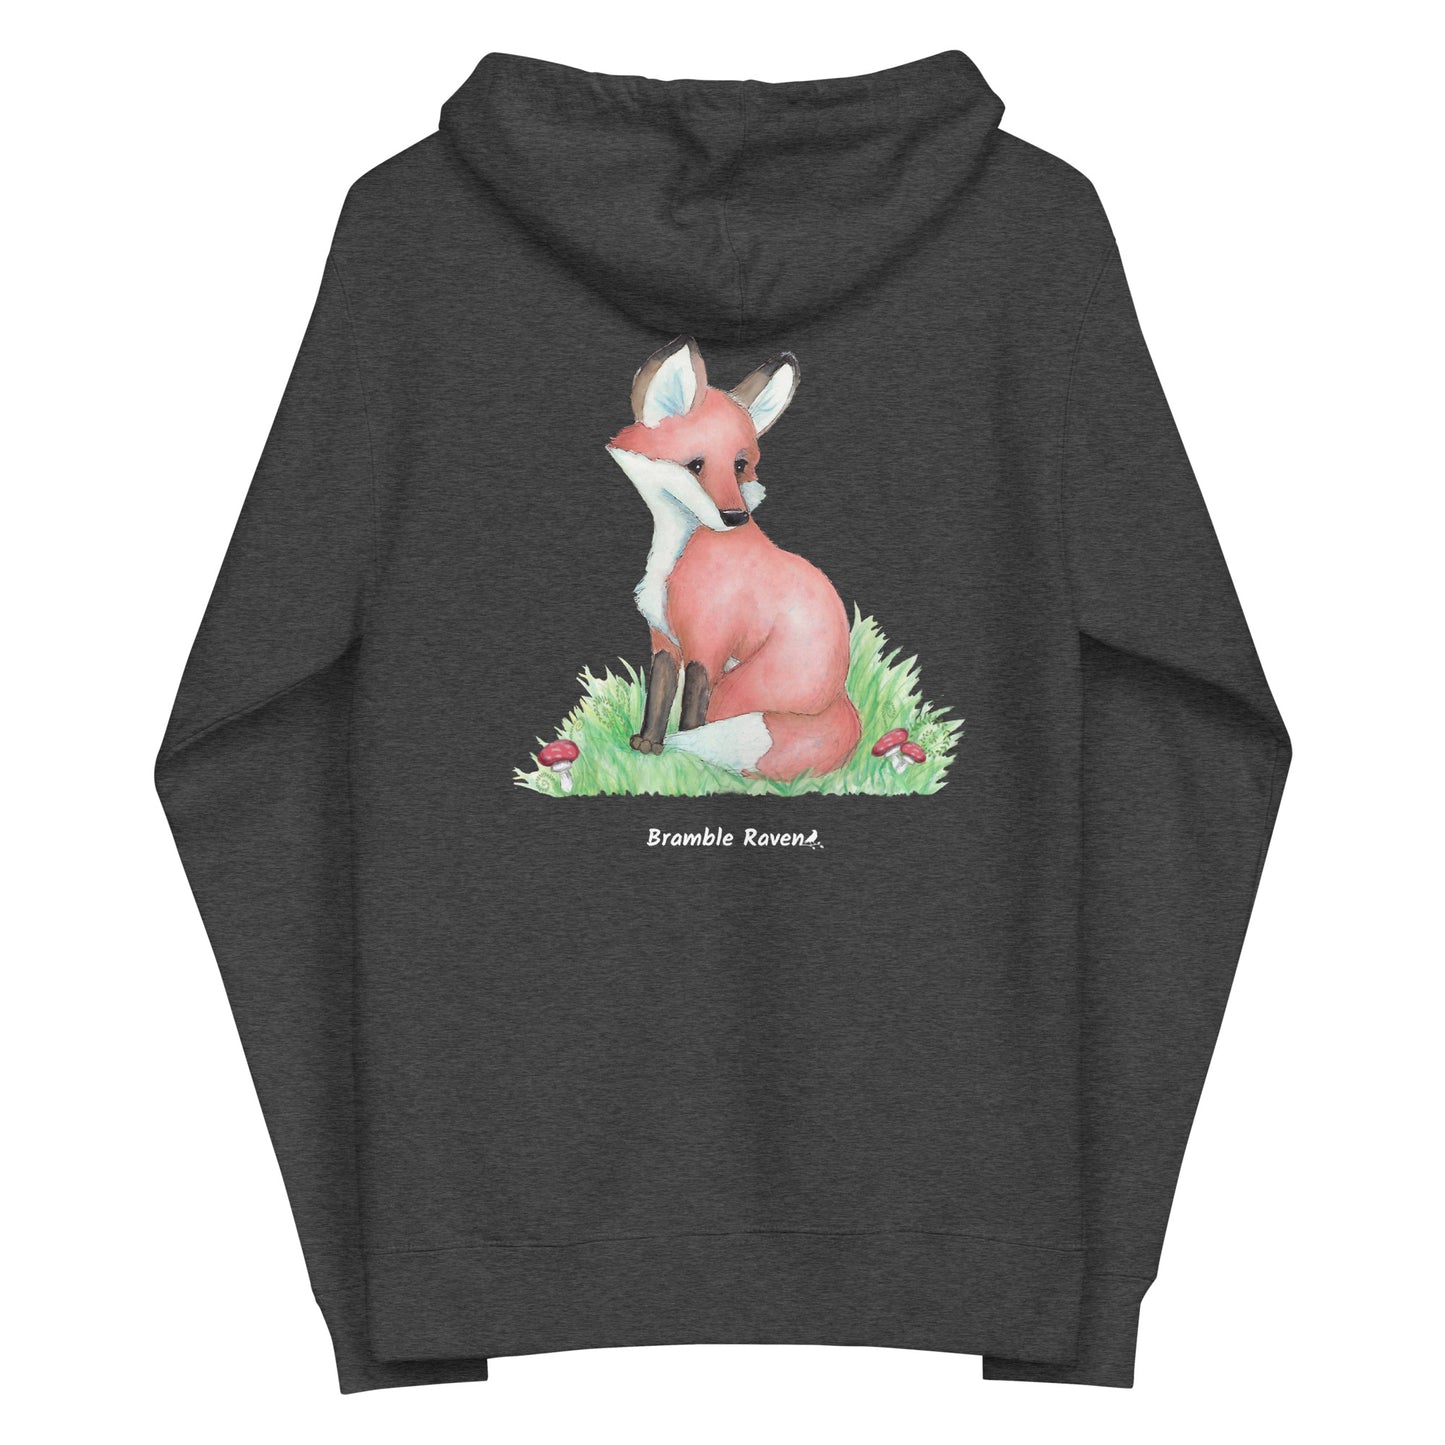 Charcoal heather grey colored unisex fleece zip up hoodie. Back design features a watercolor fox in the grass with ferns and mushrooms. Has a jersey-lined hood, metal eyelets and zipper.